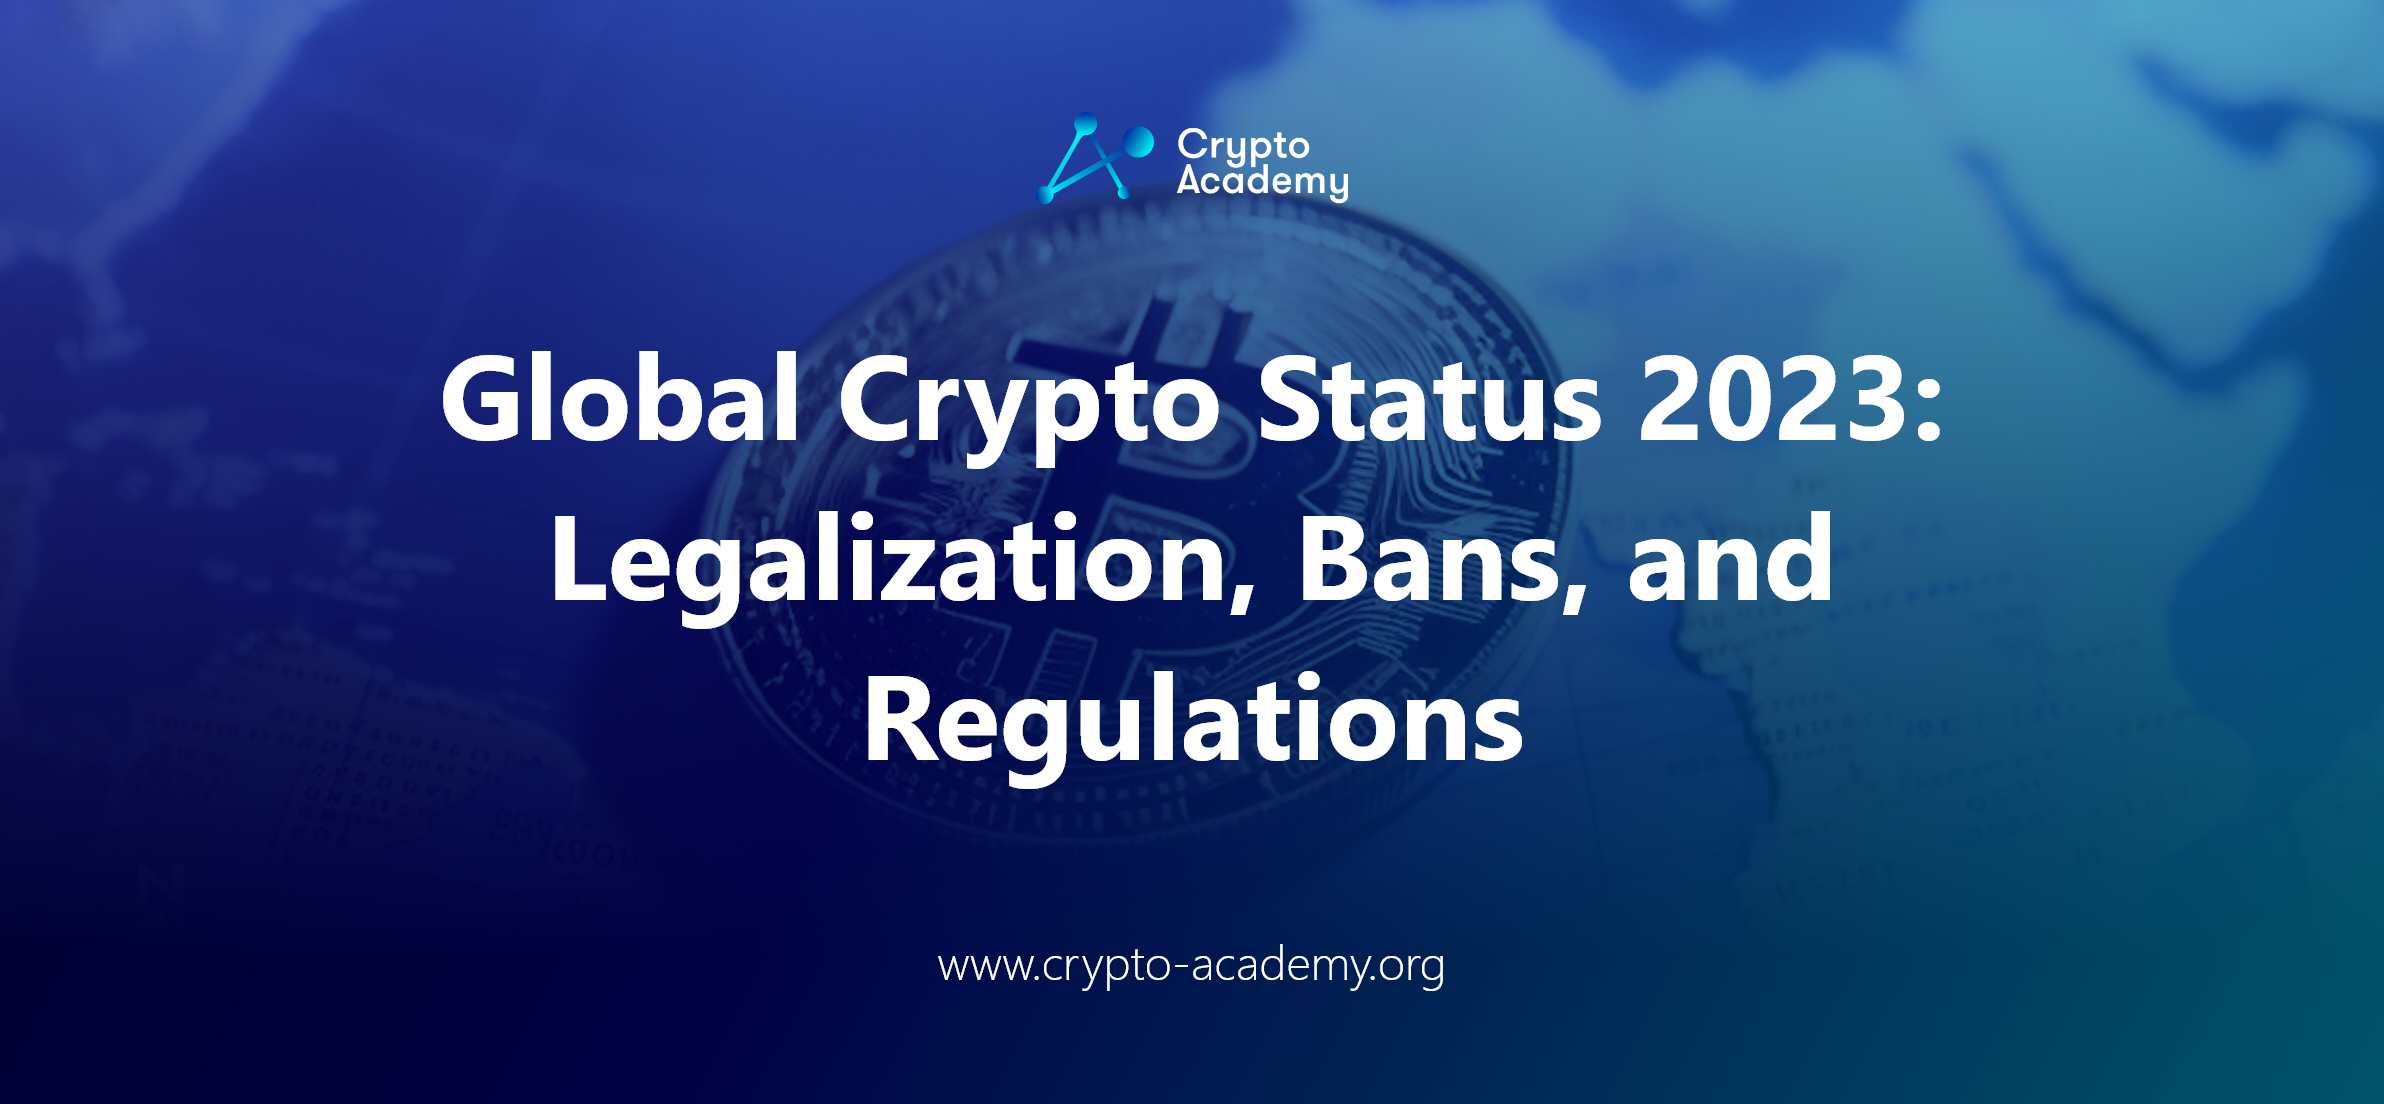 Global Crypto Status 2023: Legalization, Bans, and Regulations